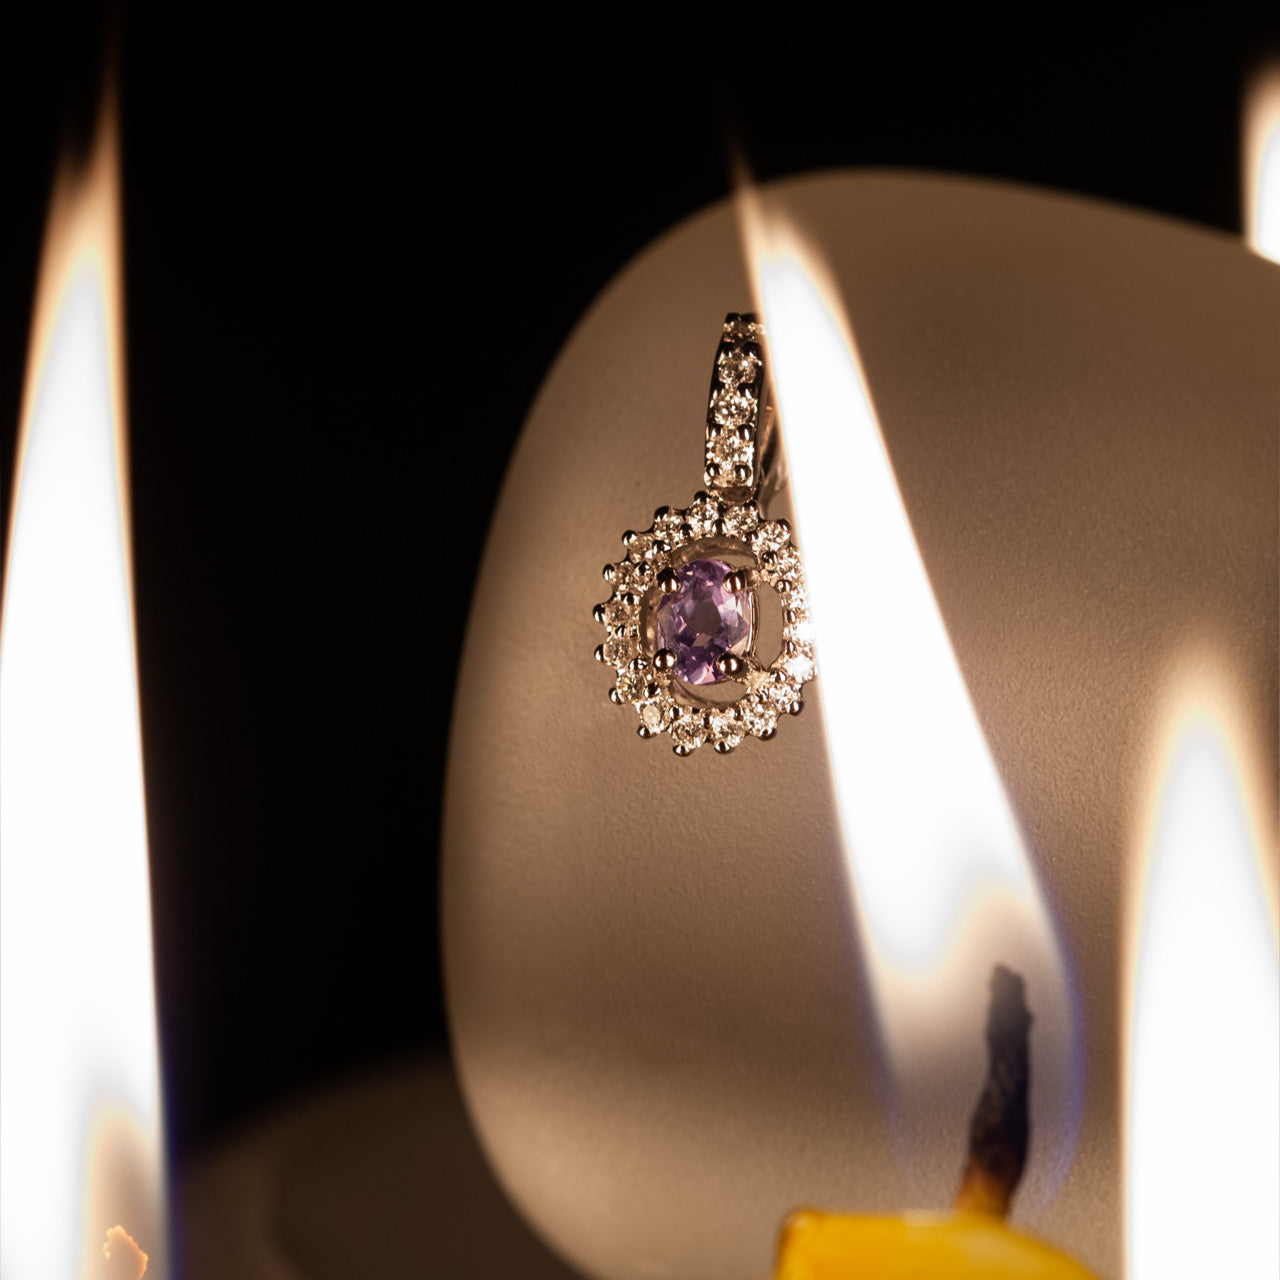 18k white gold pendant with a 0.27ct natural Alexandrite stone displayed on a candle